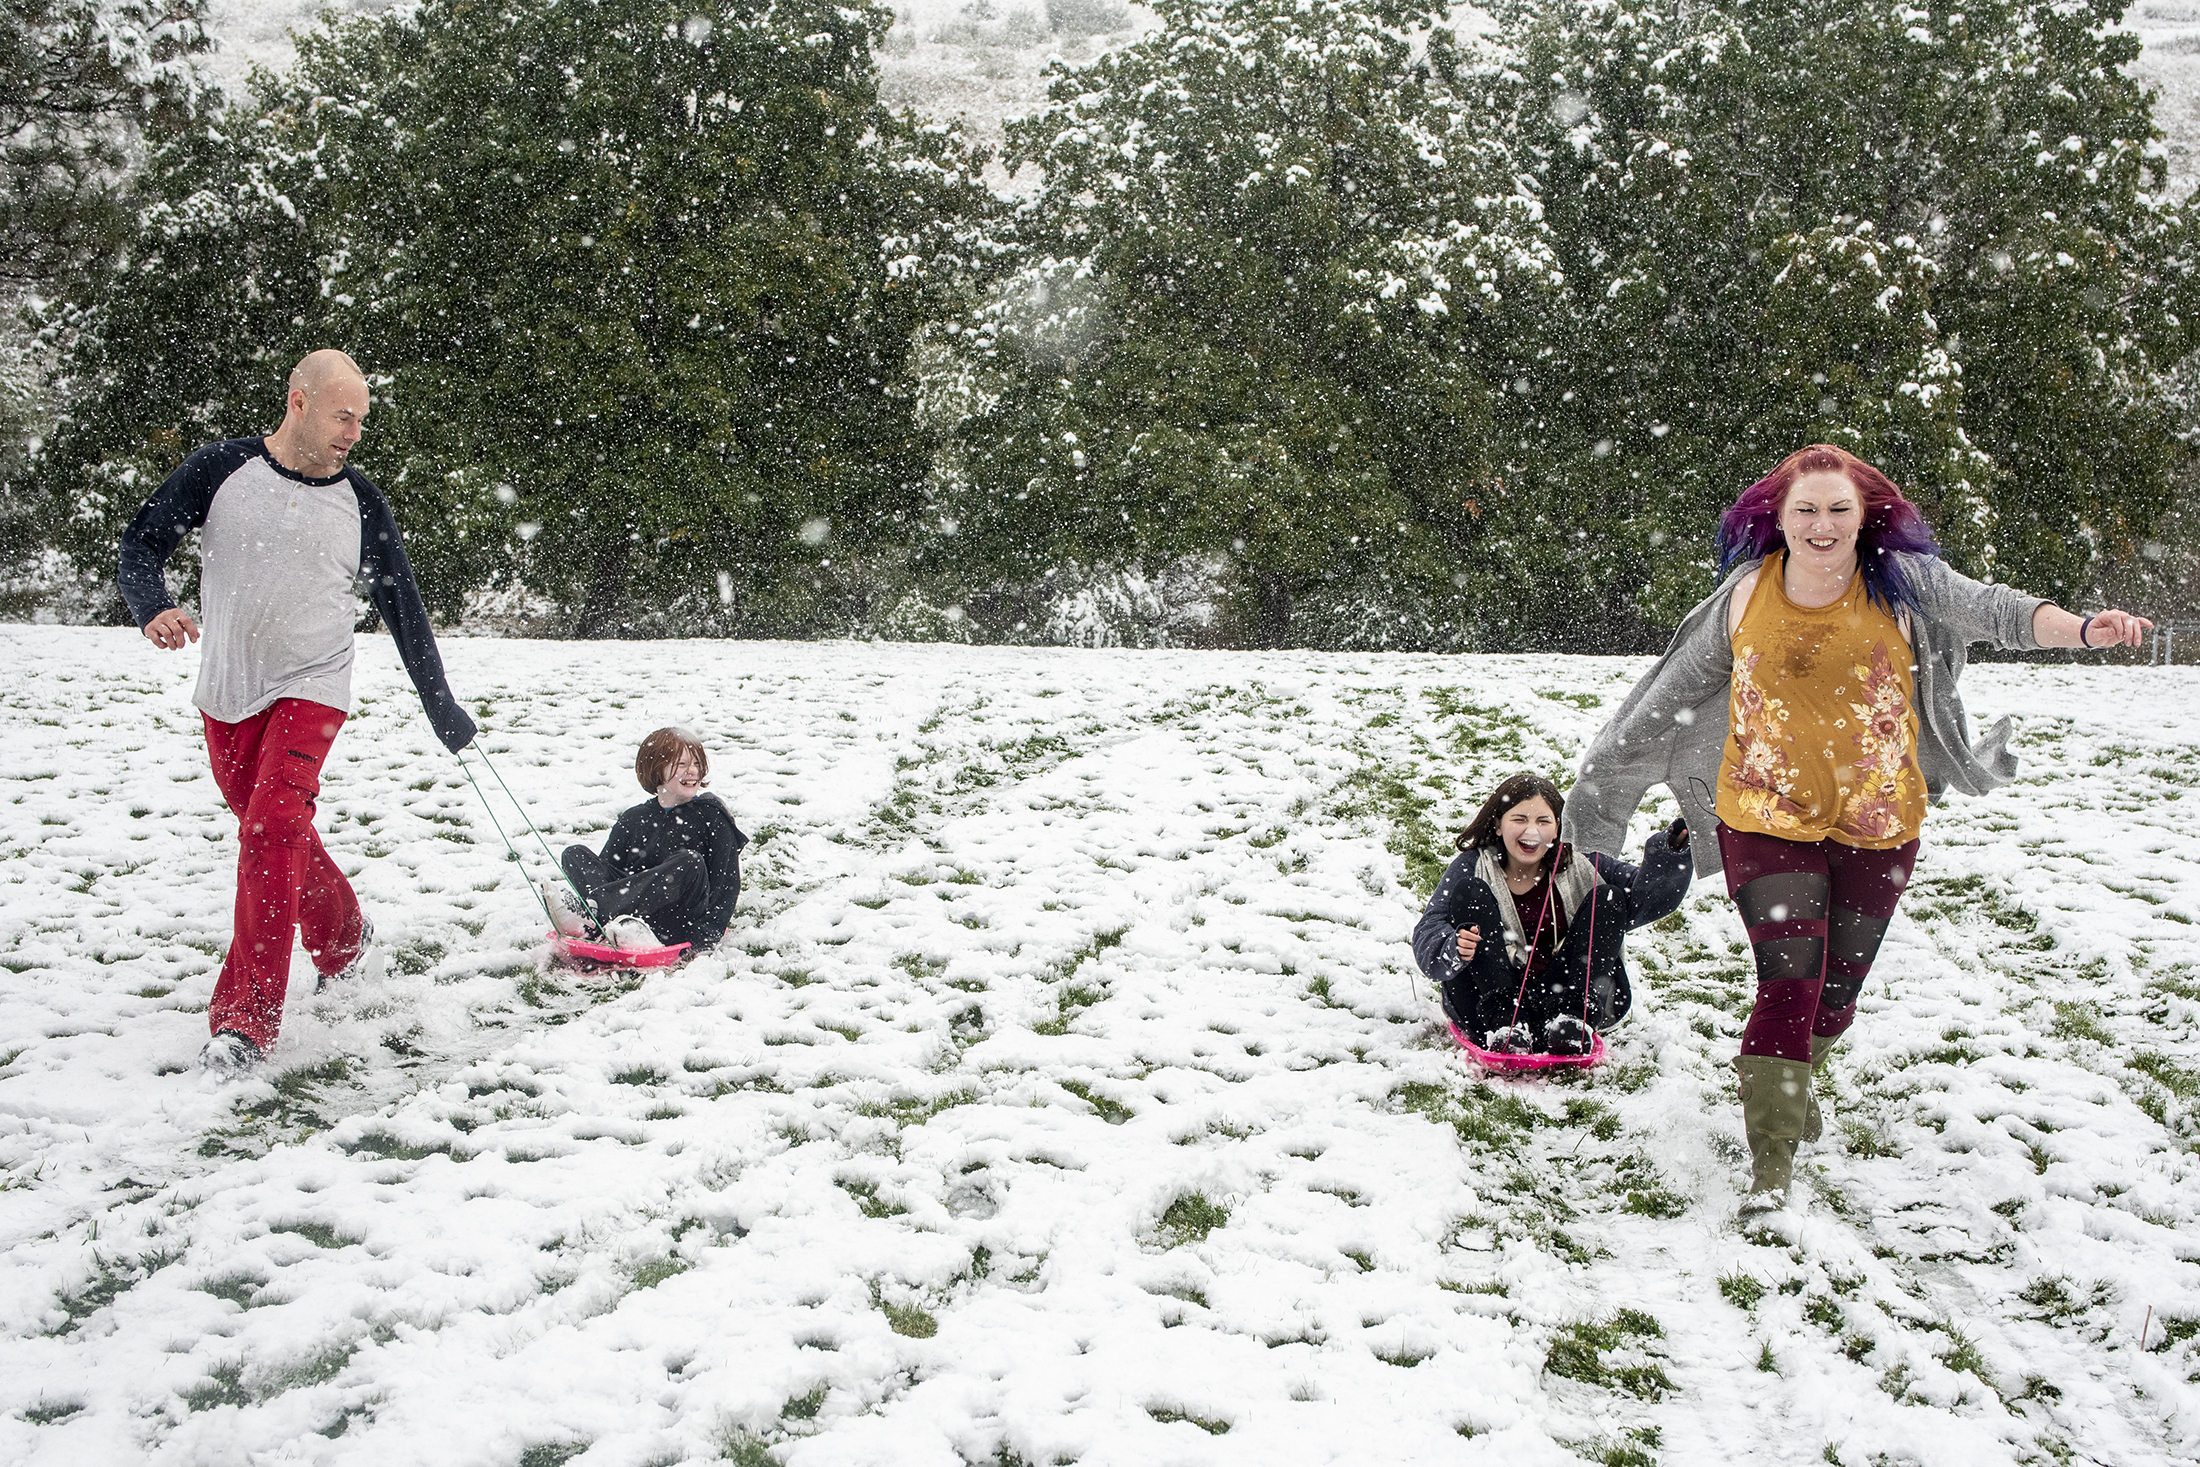 PHOTO: From left, Tommy Little, Cody Little, Kyndra Neal and Tanya Little sled down a hill in Missoula, Mont., Sept. 29, 2019 after snow in an early winter storm.